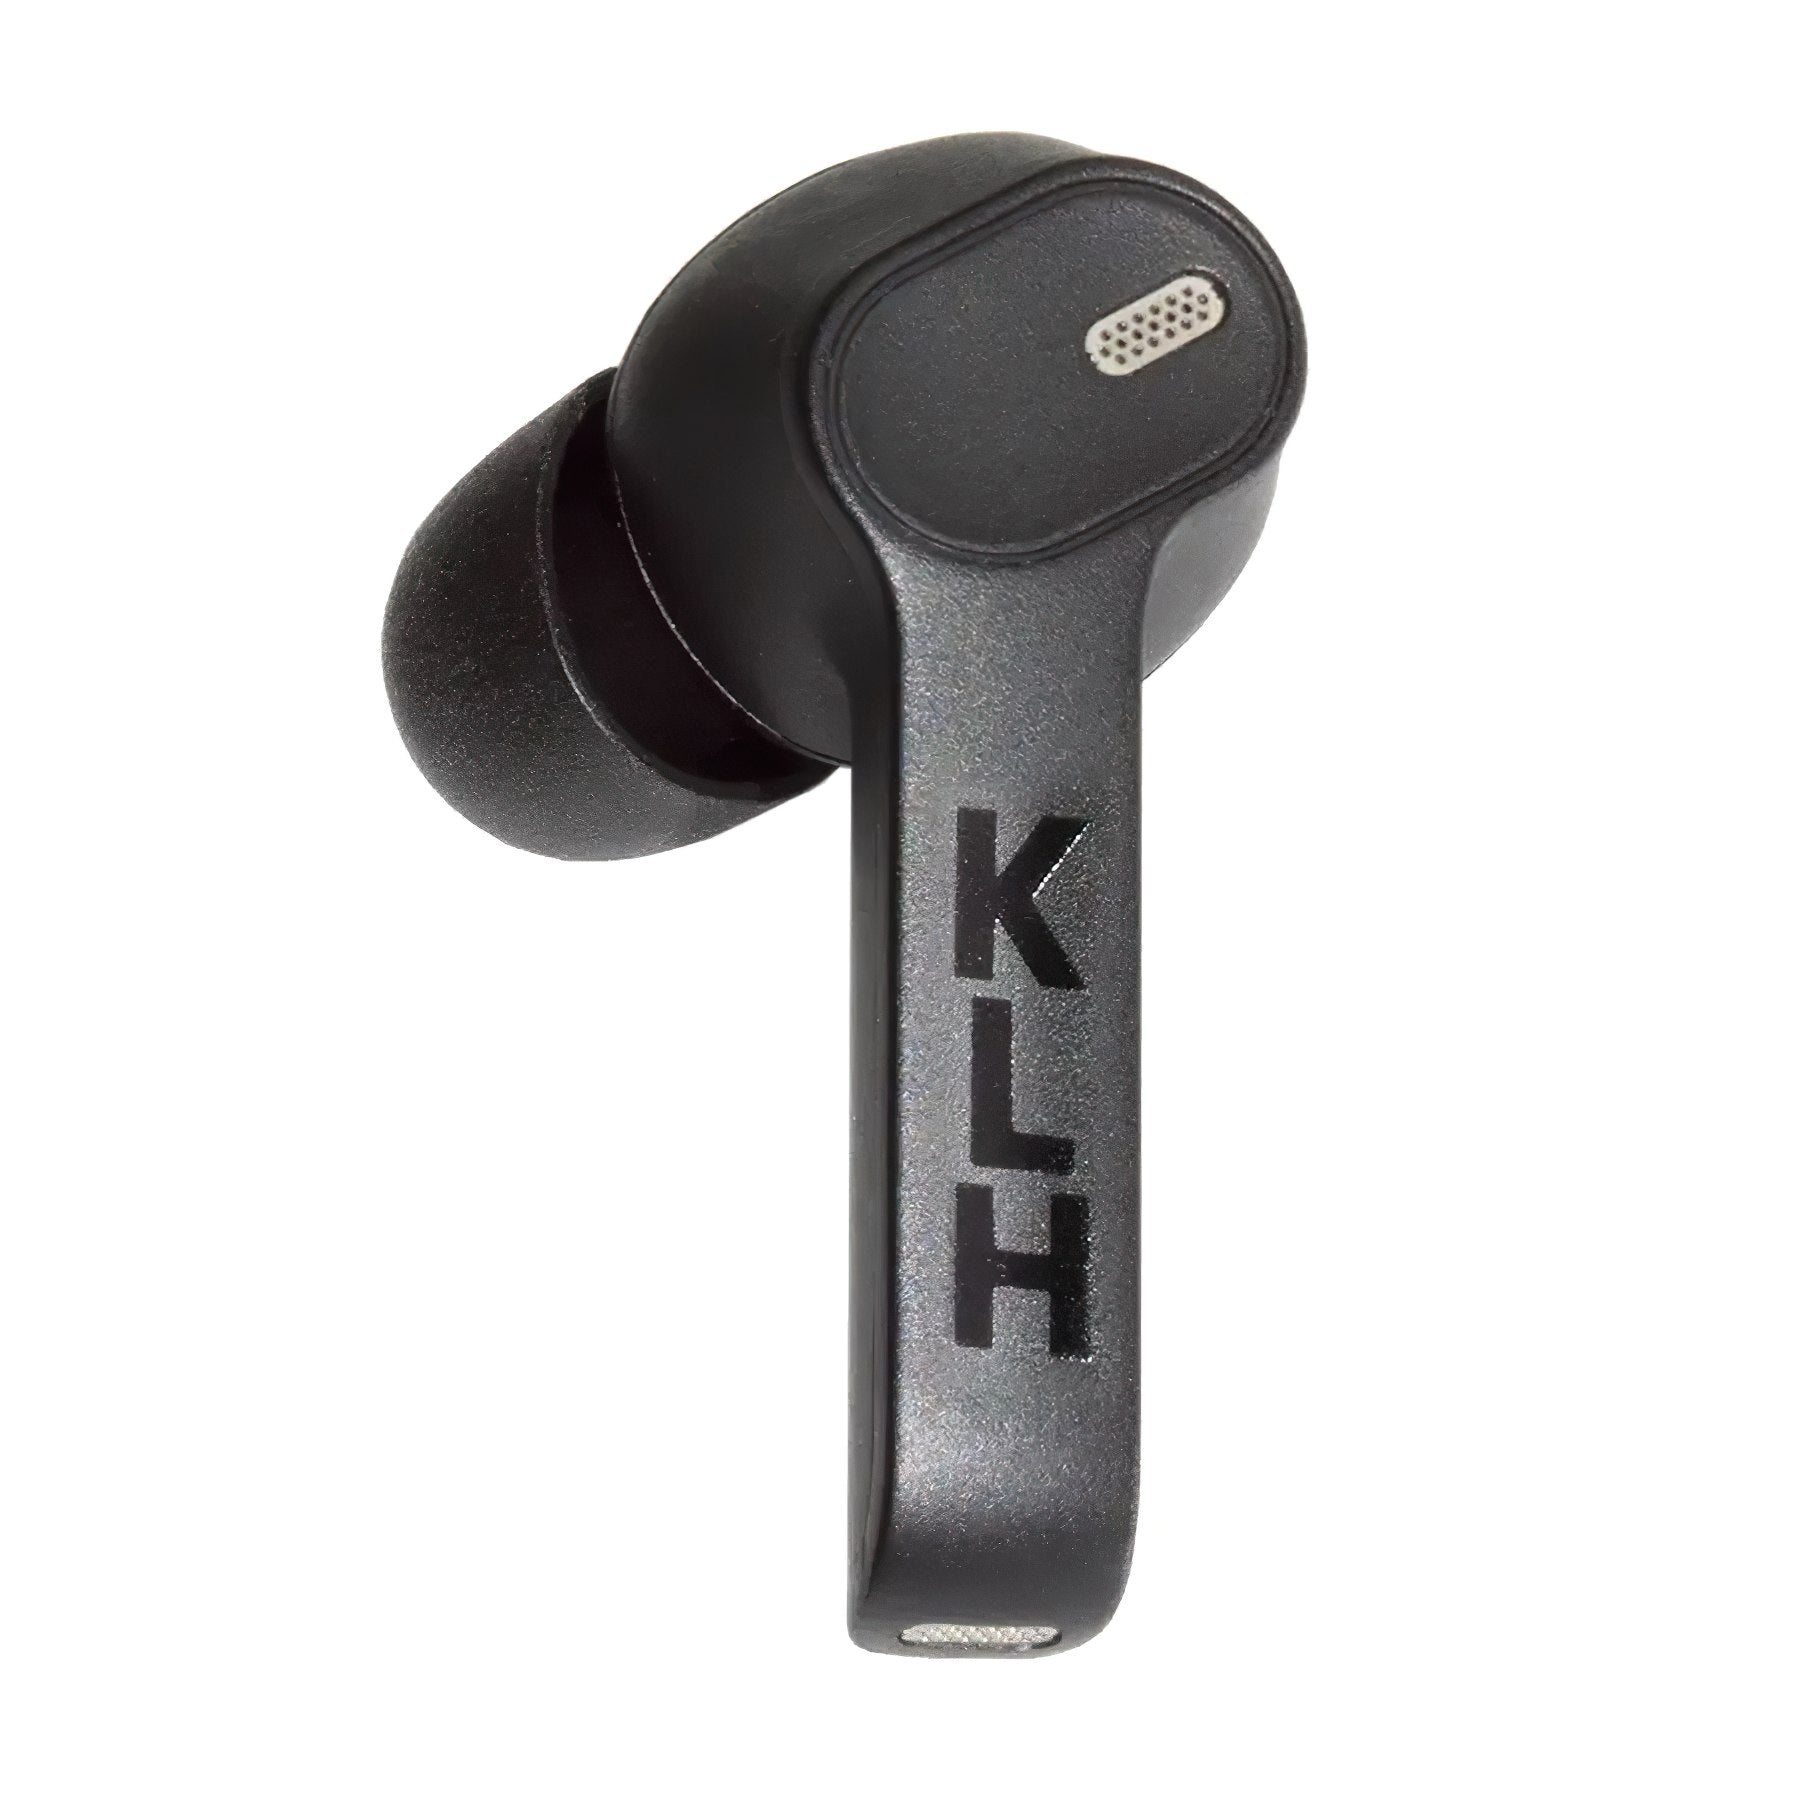 KLH Fusion True Wireless Noise-Cancelling Earbuds with Bluetooth (pair)